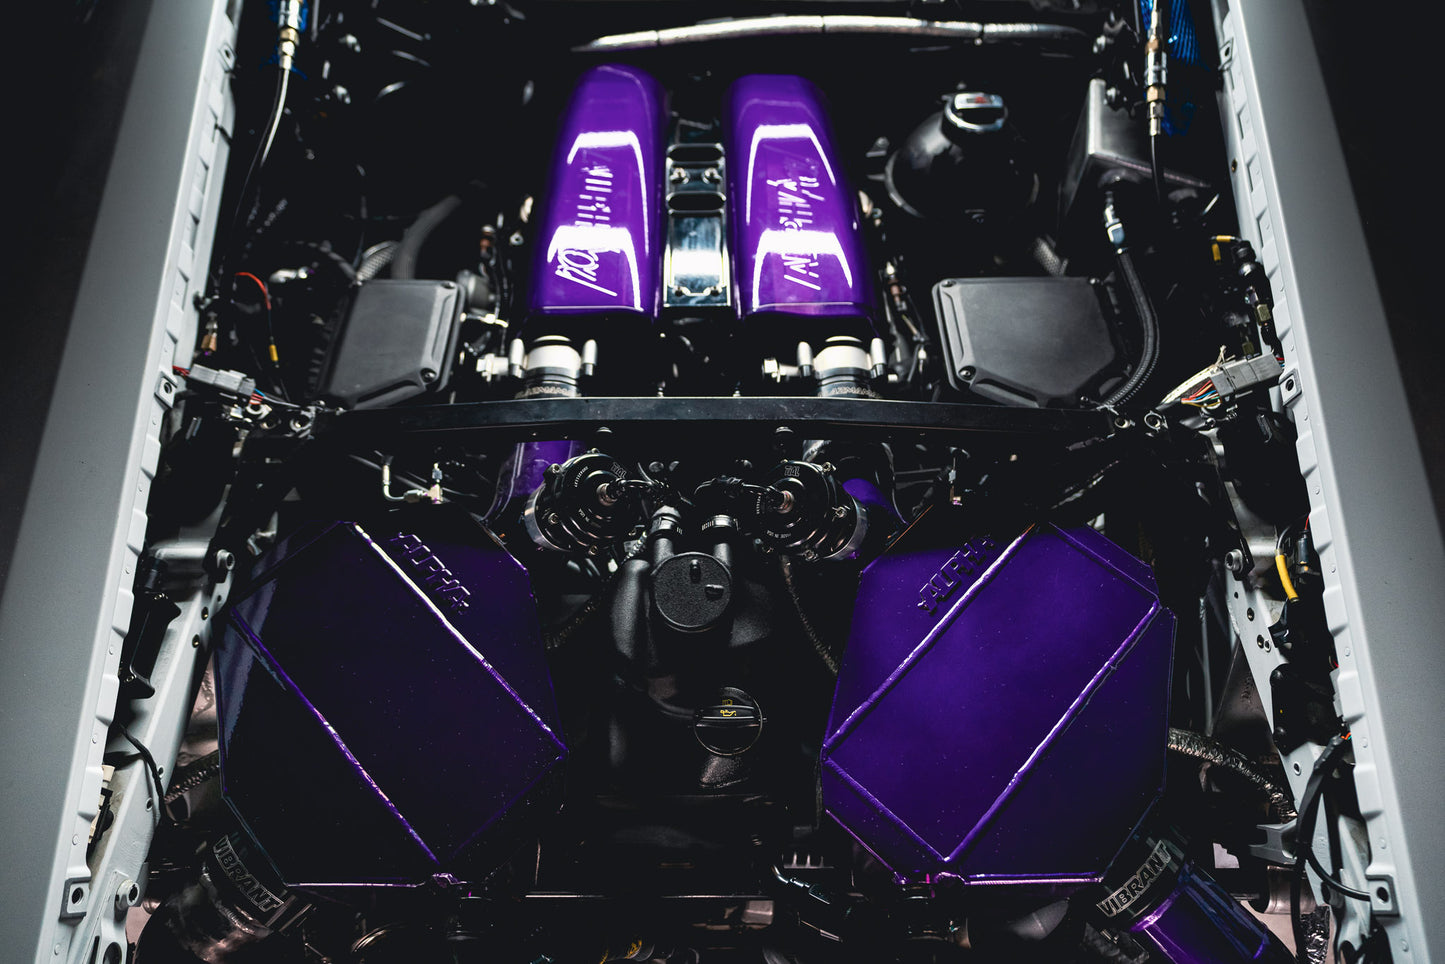 AUDI R8 ALPHA 24 TWIN TURBO PACKAGE (INSTALLED)